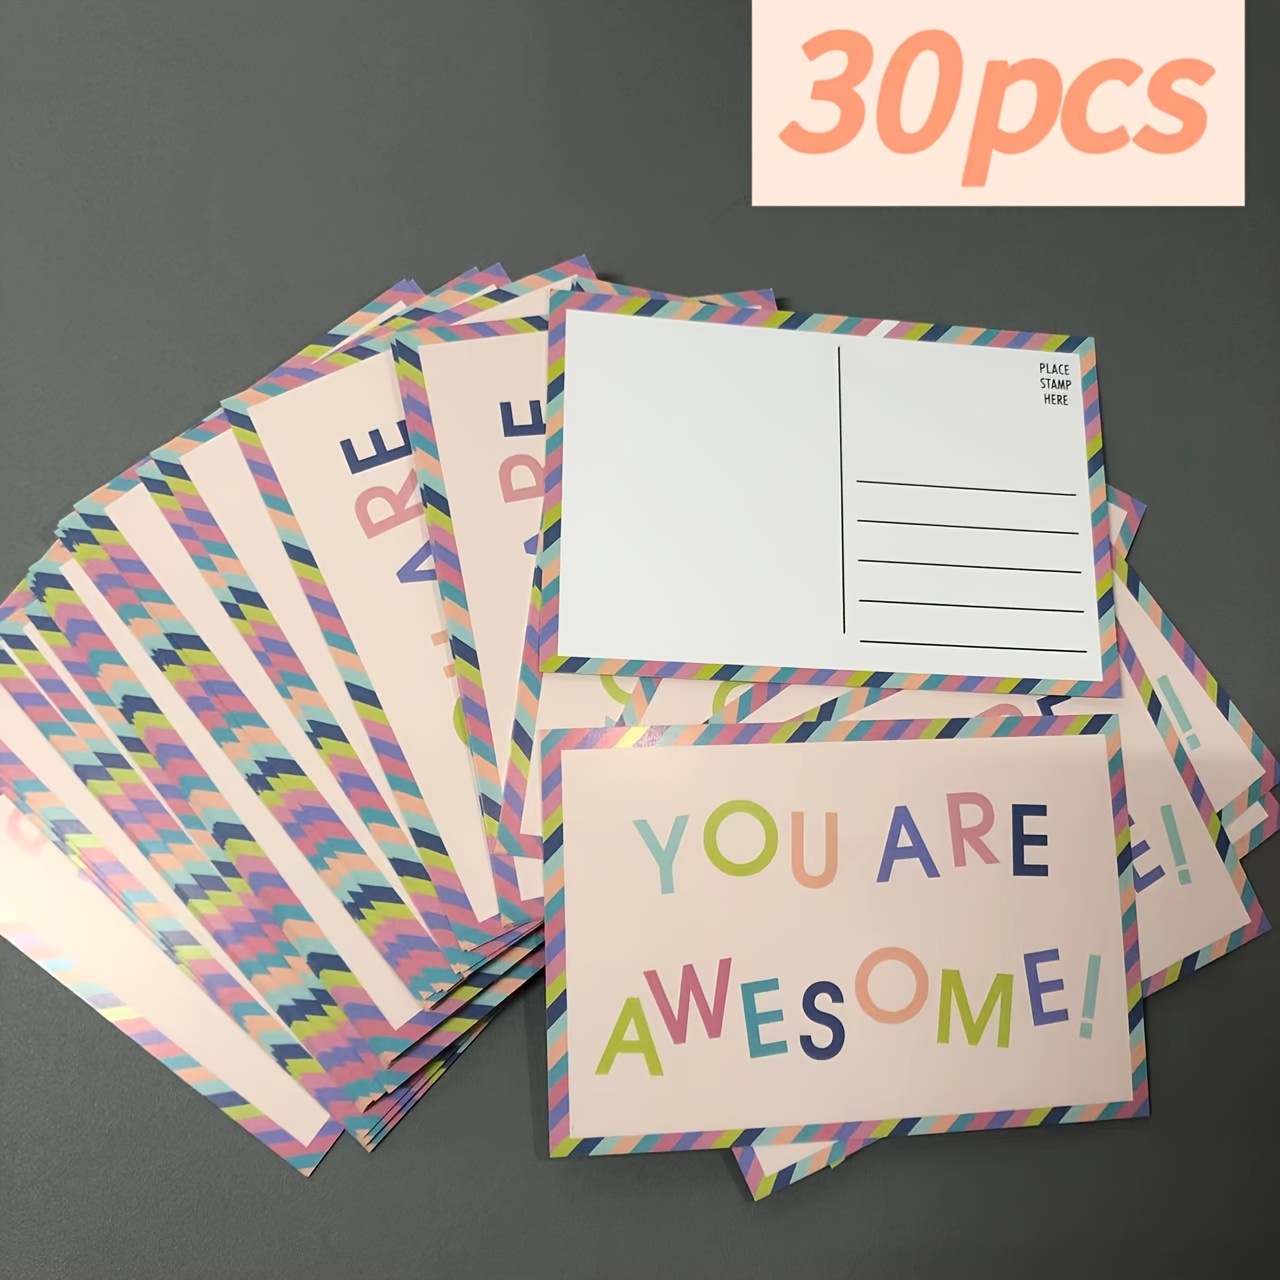 

30pcs You Are Awesome Card Postcard For Adults. Positive Affirmation Card, Goodwill Card, Employee Appreciation Gift Card 4x6 Inch